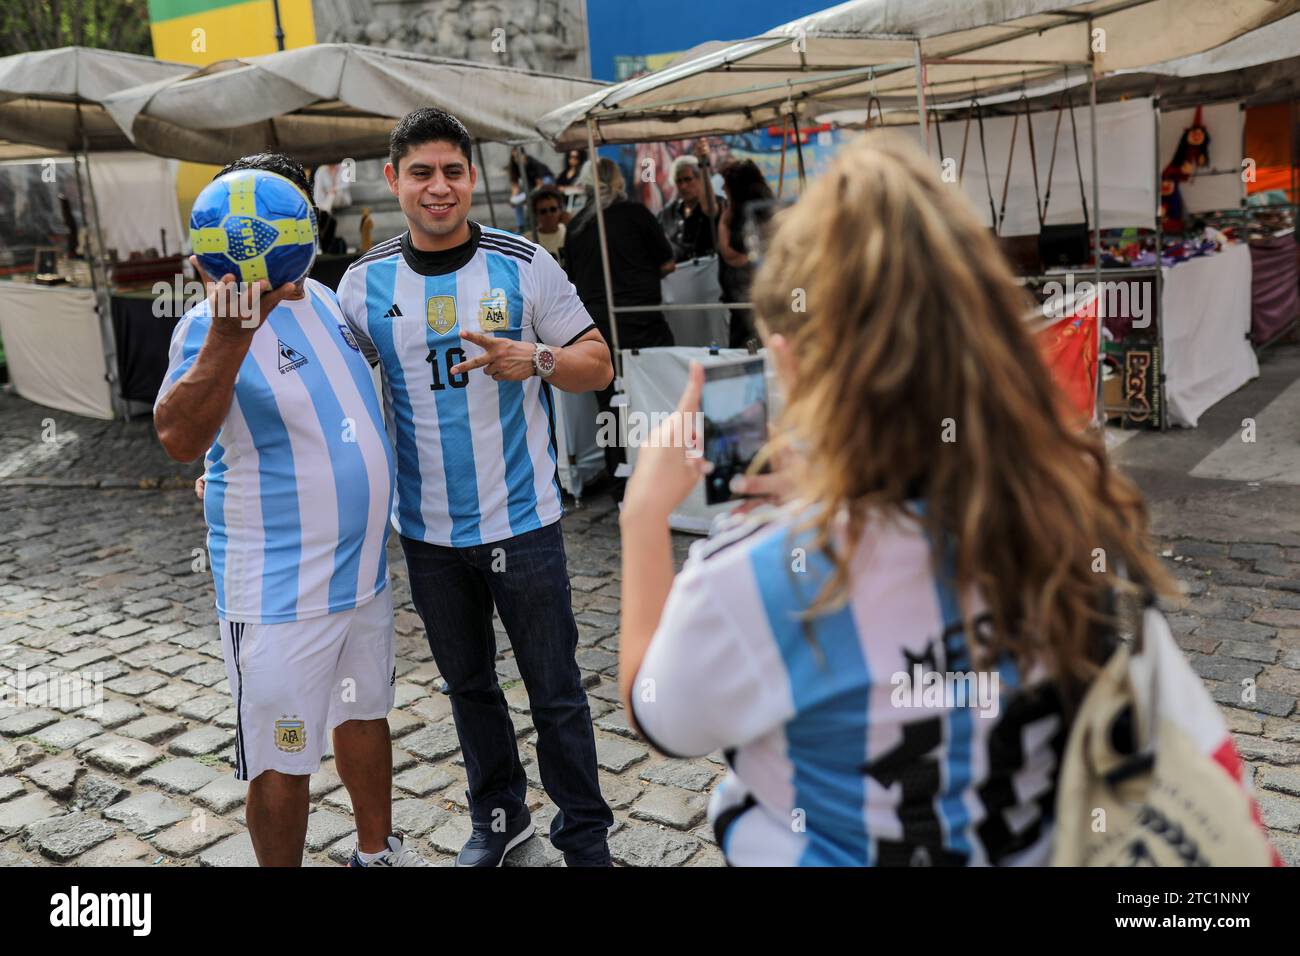 A man dressed as the late Argentine soccer player, Diego Maradona, takes photos with tourists in the 'caminitos' sector before the change of government amid economic and social upheaval. President-elect Javier Milei of La Libertad Avanza, a far-right libertarian who burst onto the Argentine political scene with eccentric and radical proposals, will take office on Sunday, December 10, replacing incumbent Peronist Alberto Fernández. Milei describes himself as an 'anarcho-capitalist' libertarian who wants to drastically reduce the size of the state and replace the local peso with the US dollar. T Stock Photo